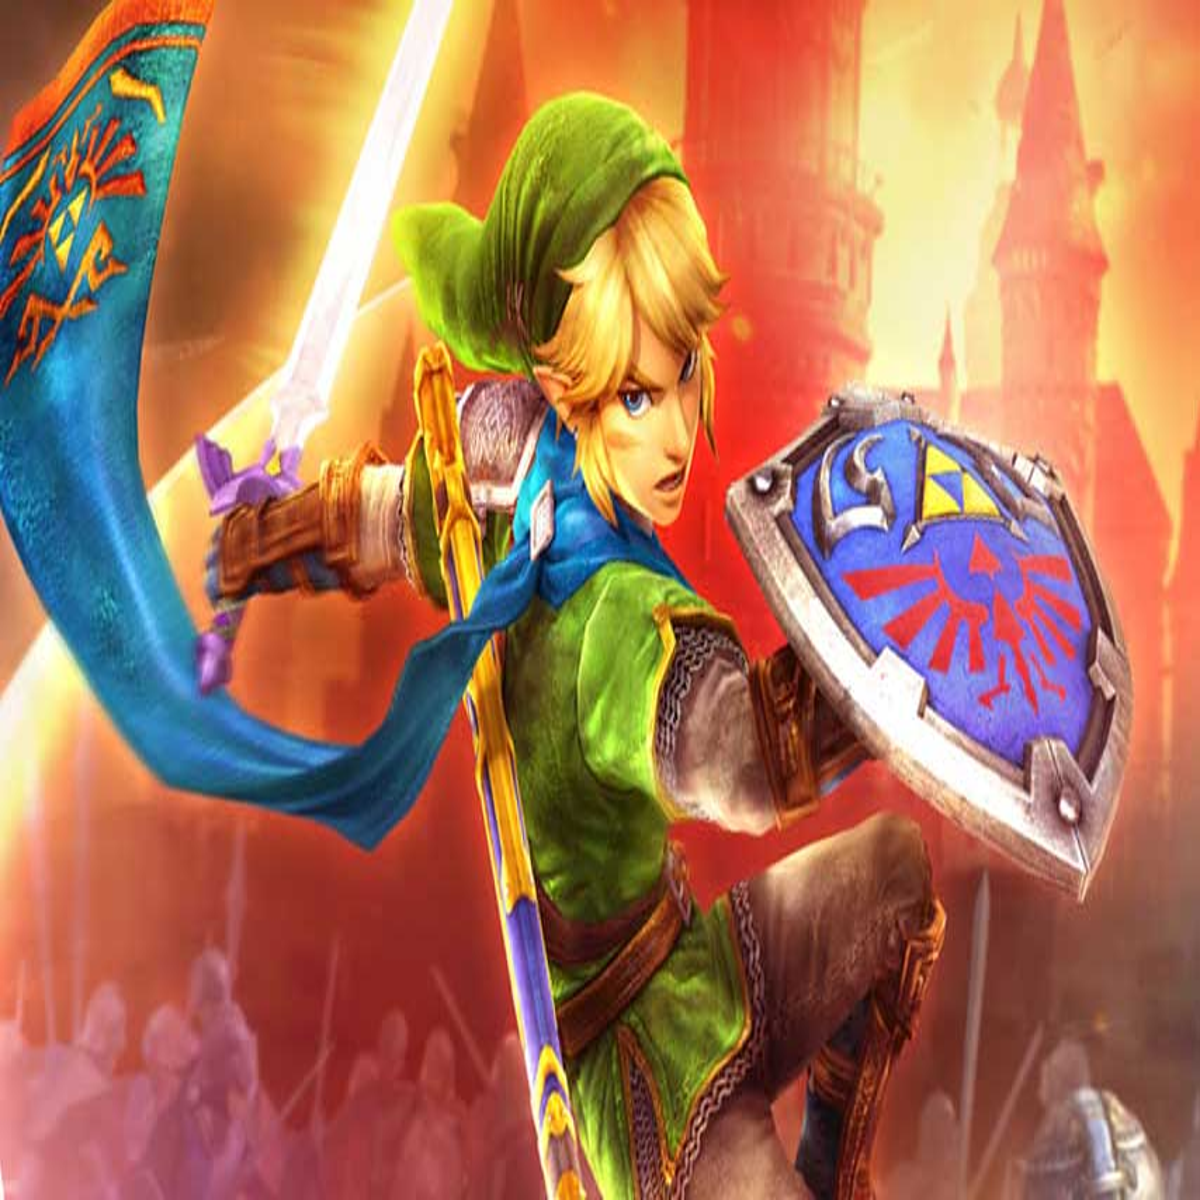 Famitsu's Hyrule Warriors: Age of Calamity review says it's one of